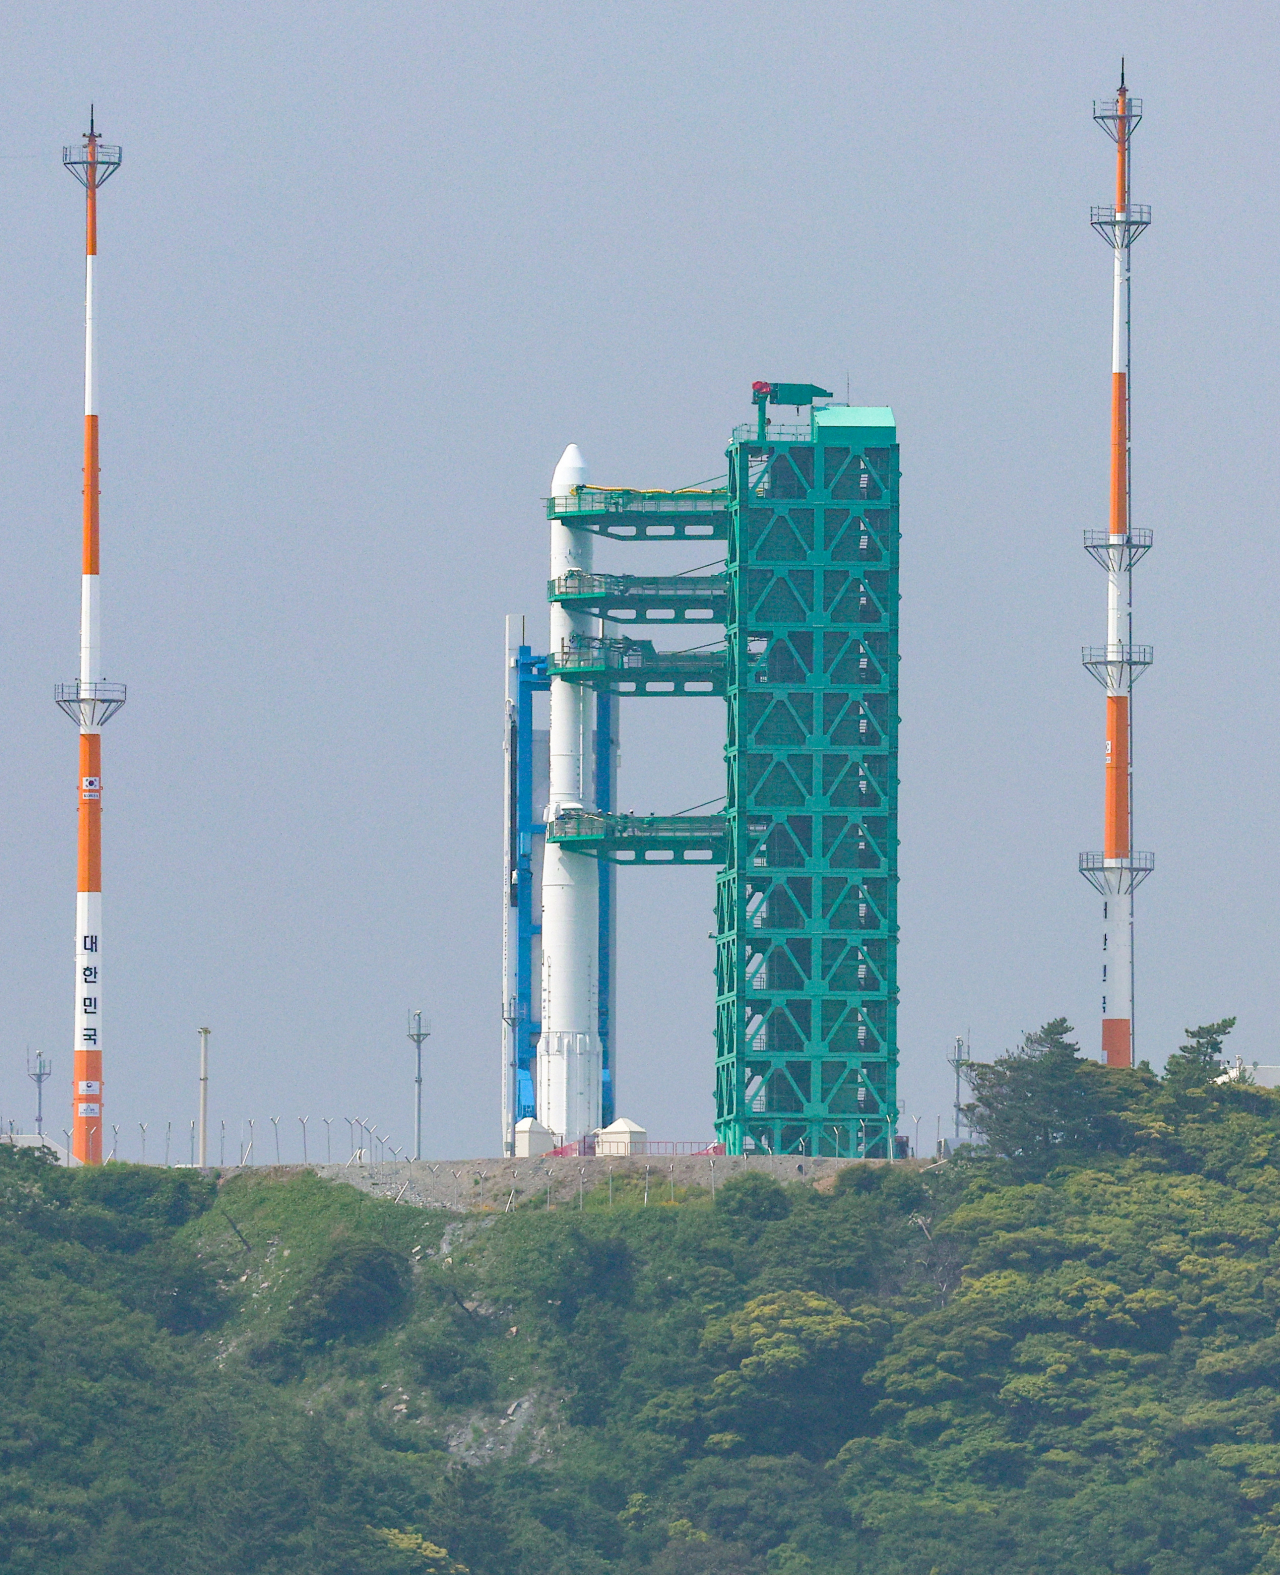 South Korea's space rocket Nuri is erected at the launch pad at Naro Space Center in Goheung, South Jeolla Province, on Tuesday. (Yonhap)